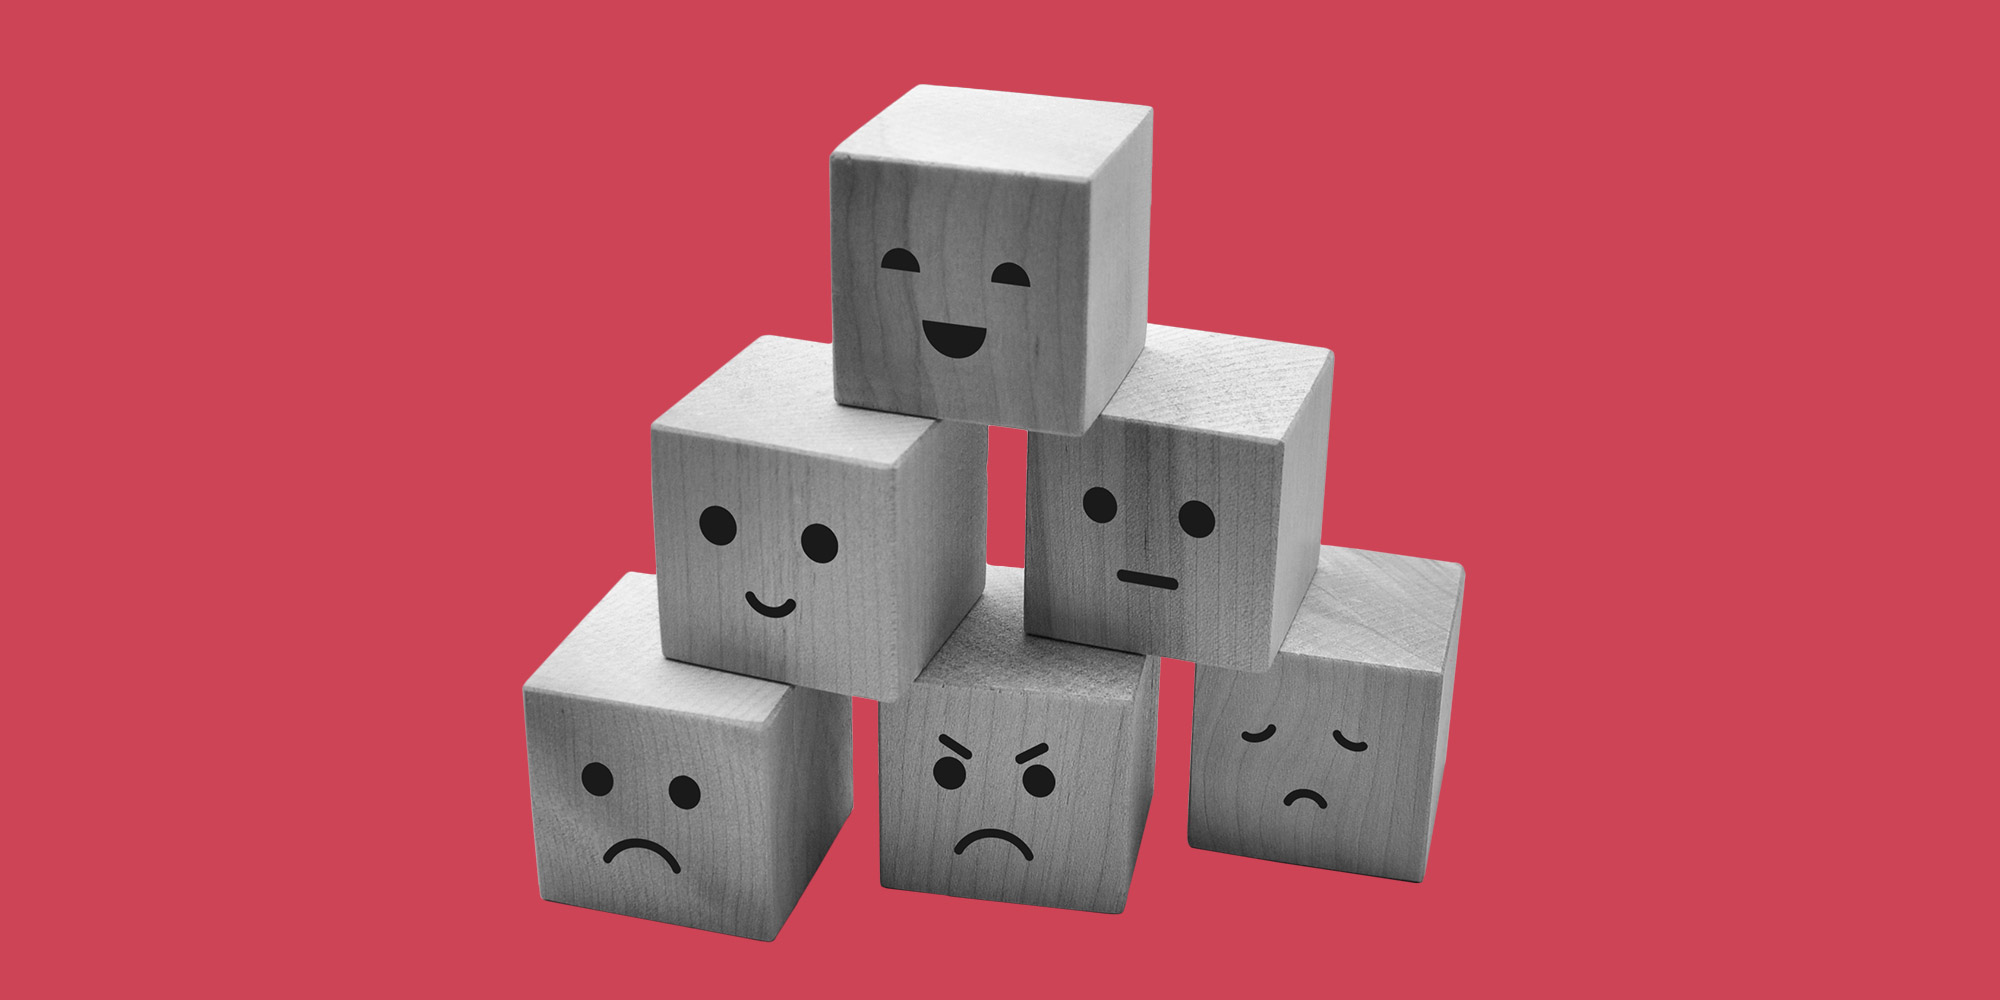 A stack of wooden children's blocks with facial expressions painted on them